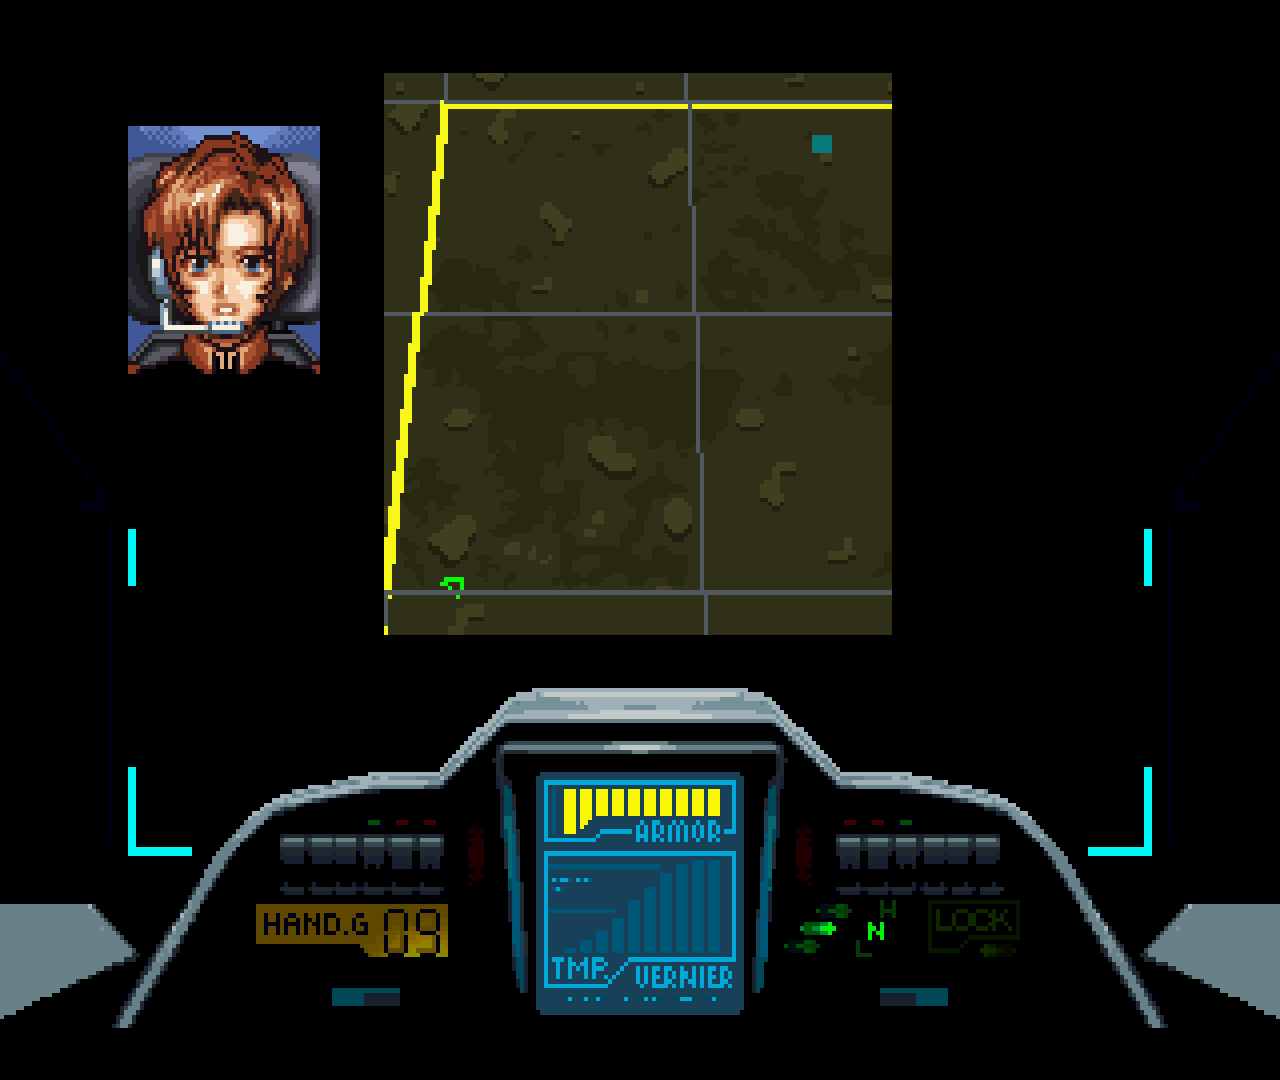 Figure 14 - Your mission map in Mobile Suit Gundam 2 and 3, which you see before each mission